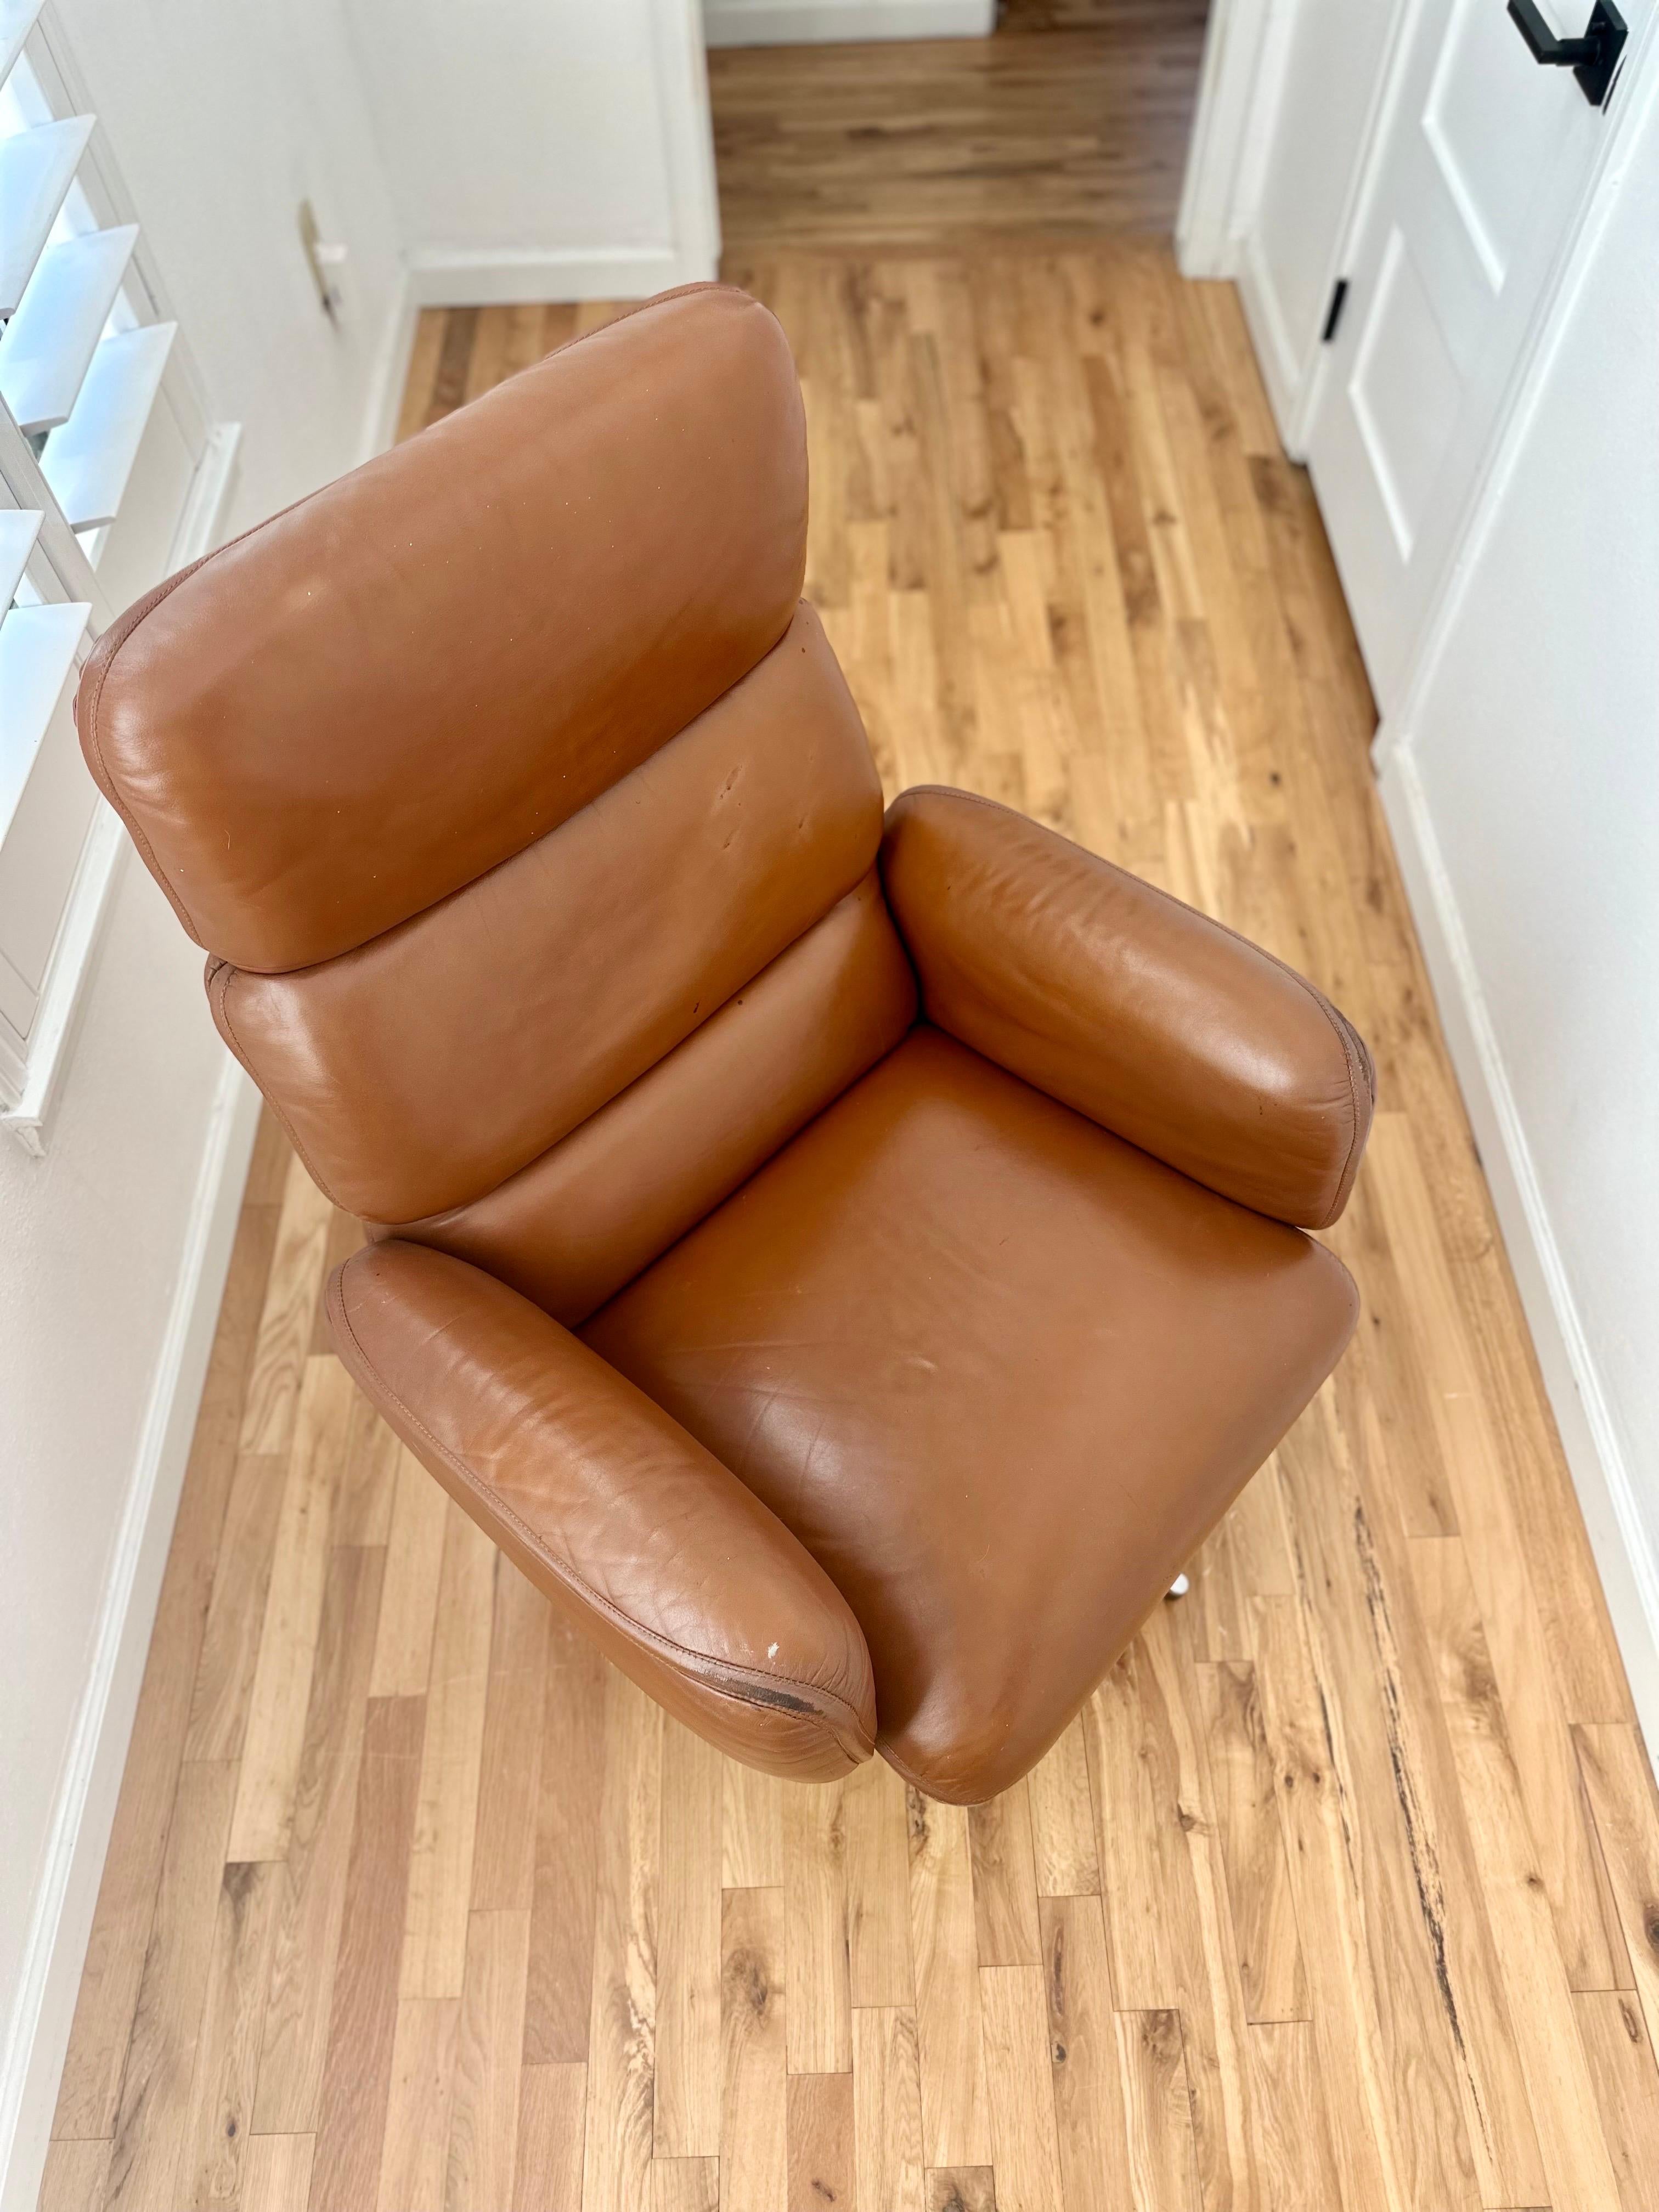 Handsome Otto Zapf for Knoll executive desk chair in cognac leather on four-star base with casters included. Soft, supple, and rich leather cushions are incredibly ergonomic yet the design remains timelessly modern. Swivels, tilts, and